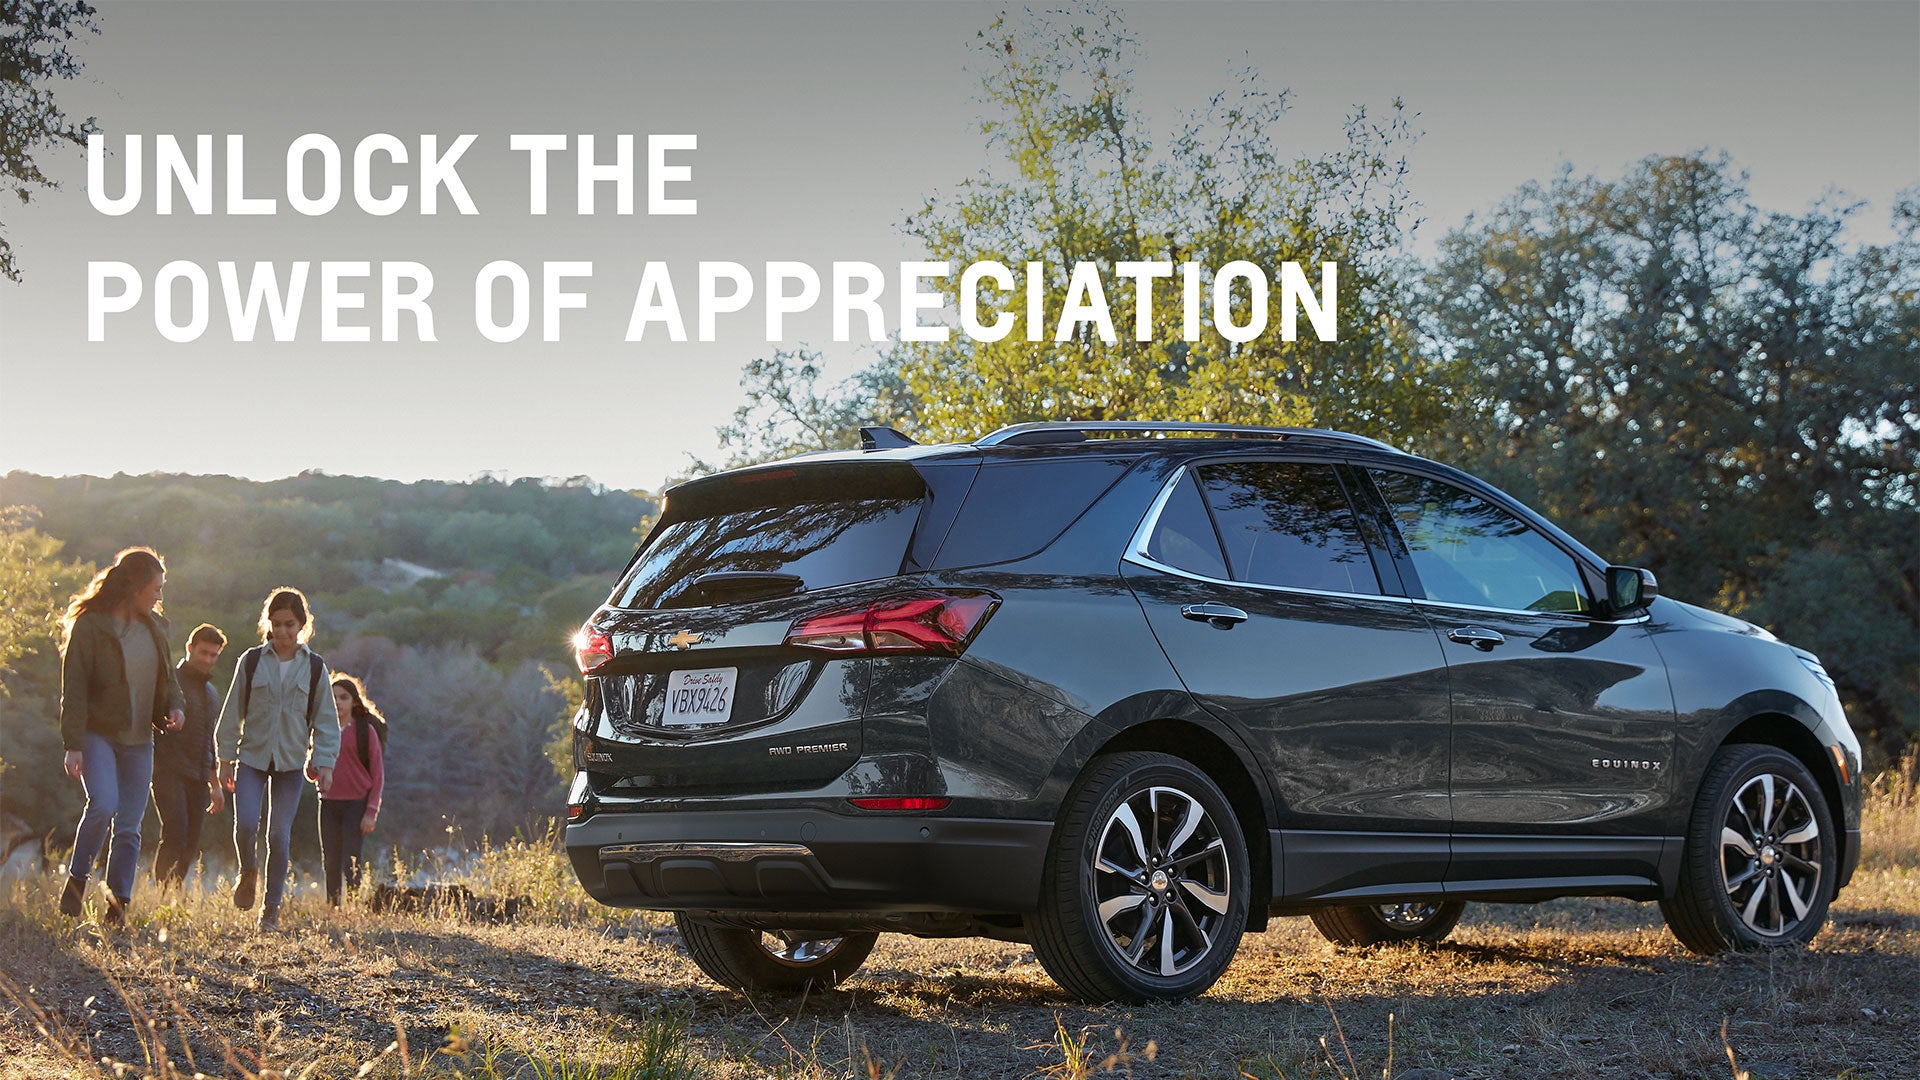 Unlock the power of appreciation | Parkway Chevrolet in Tomball TX